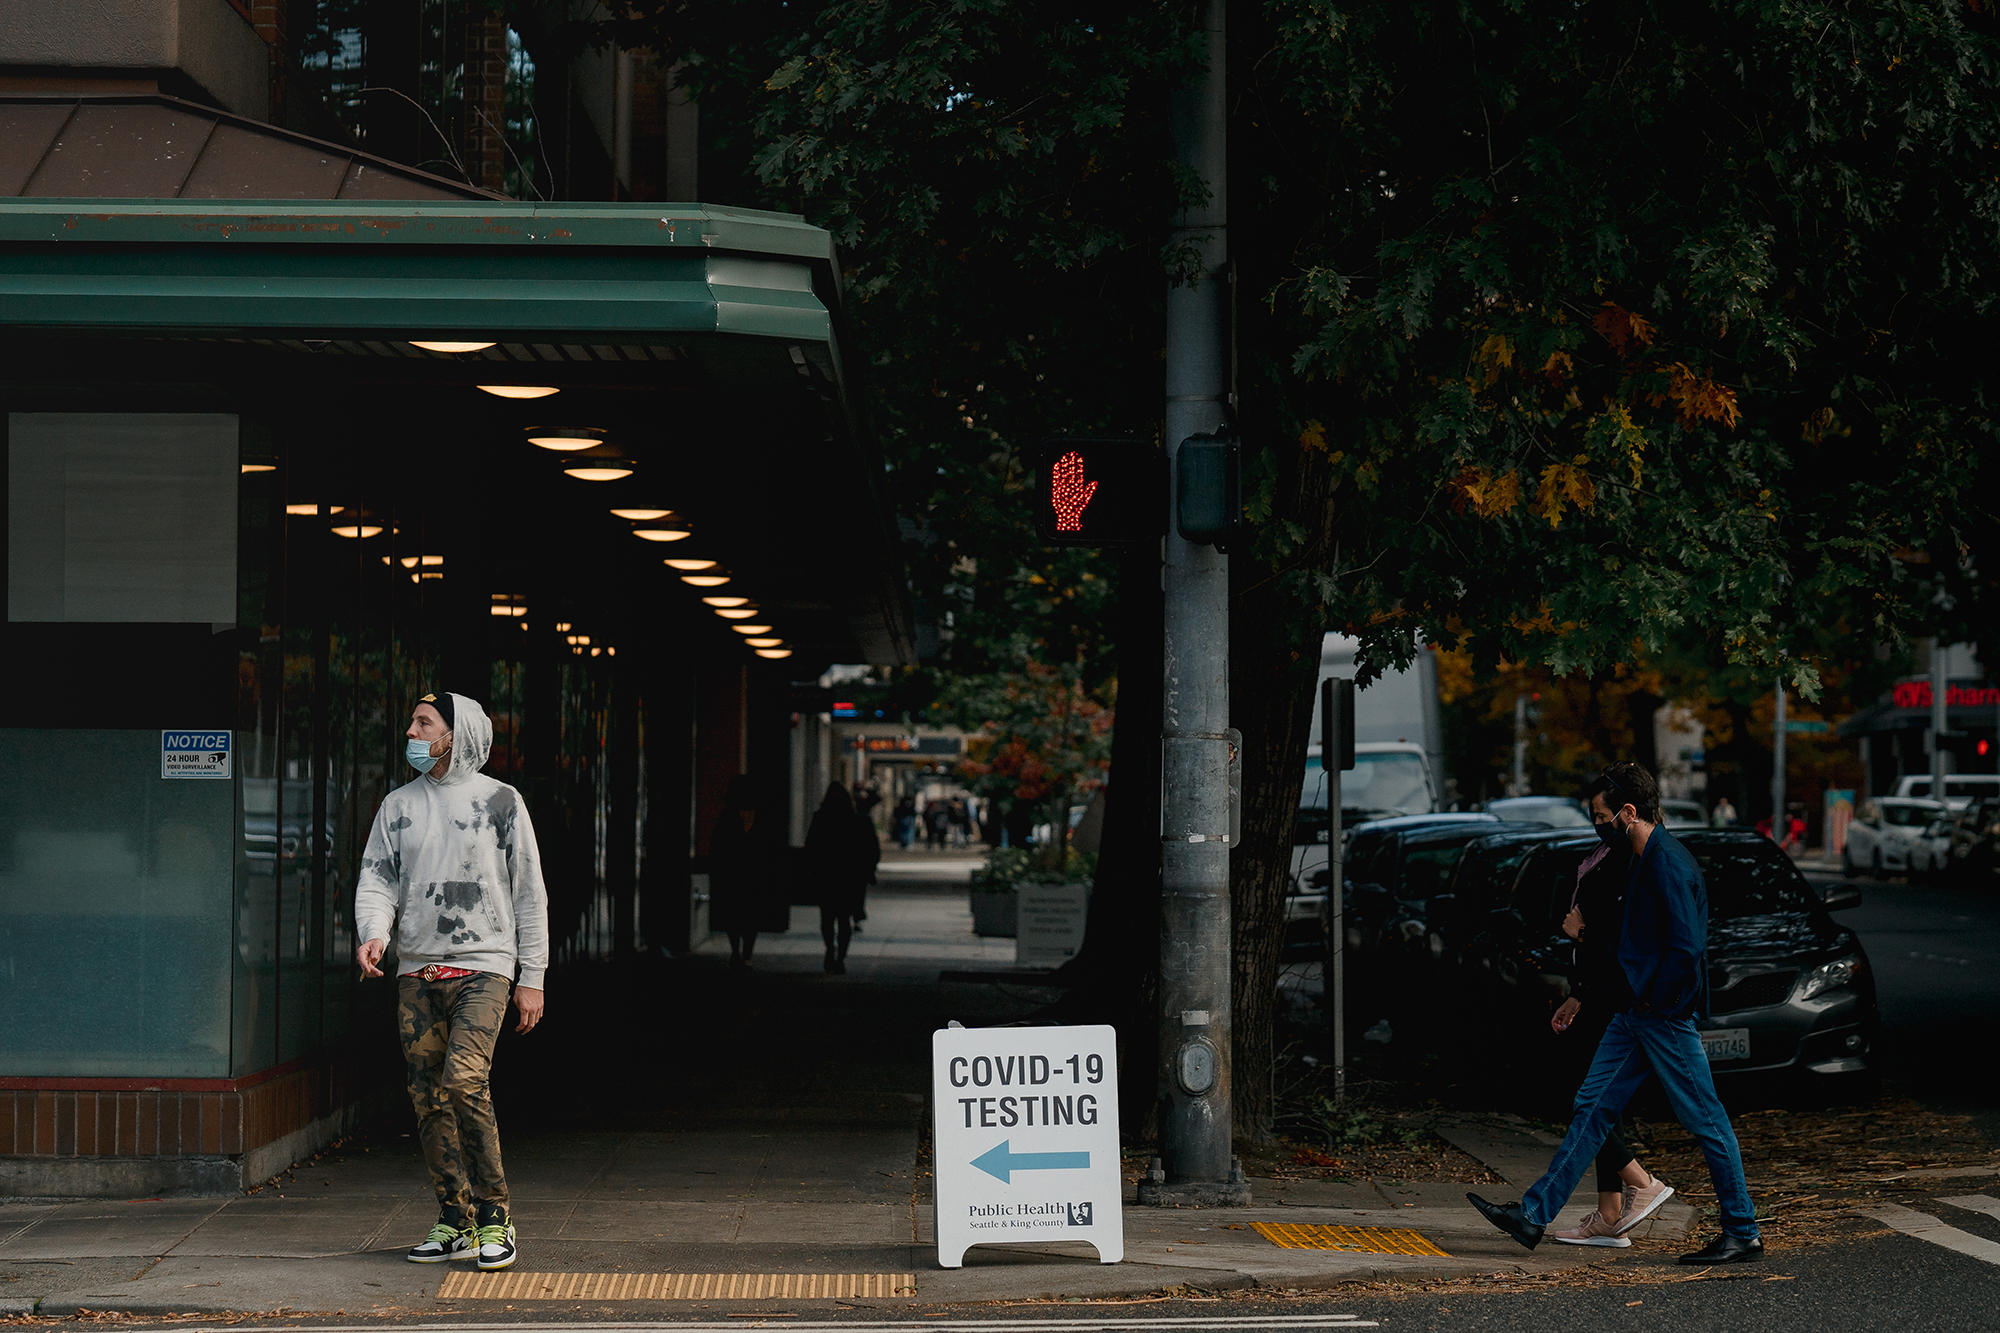 People wearing masks walk by a sign offering COVID-19 testing.